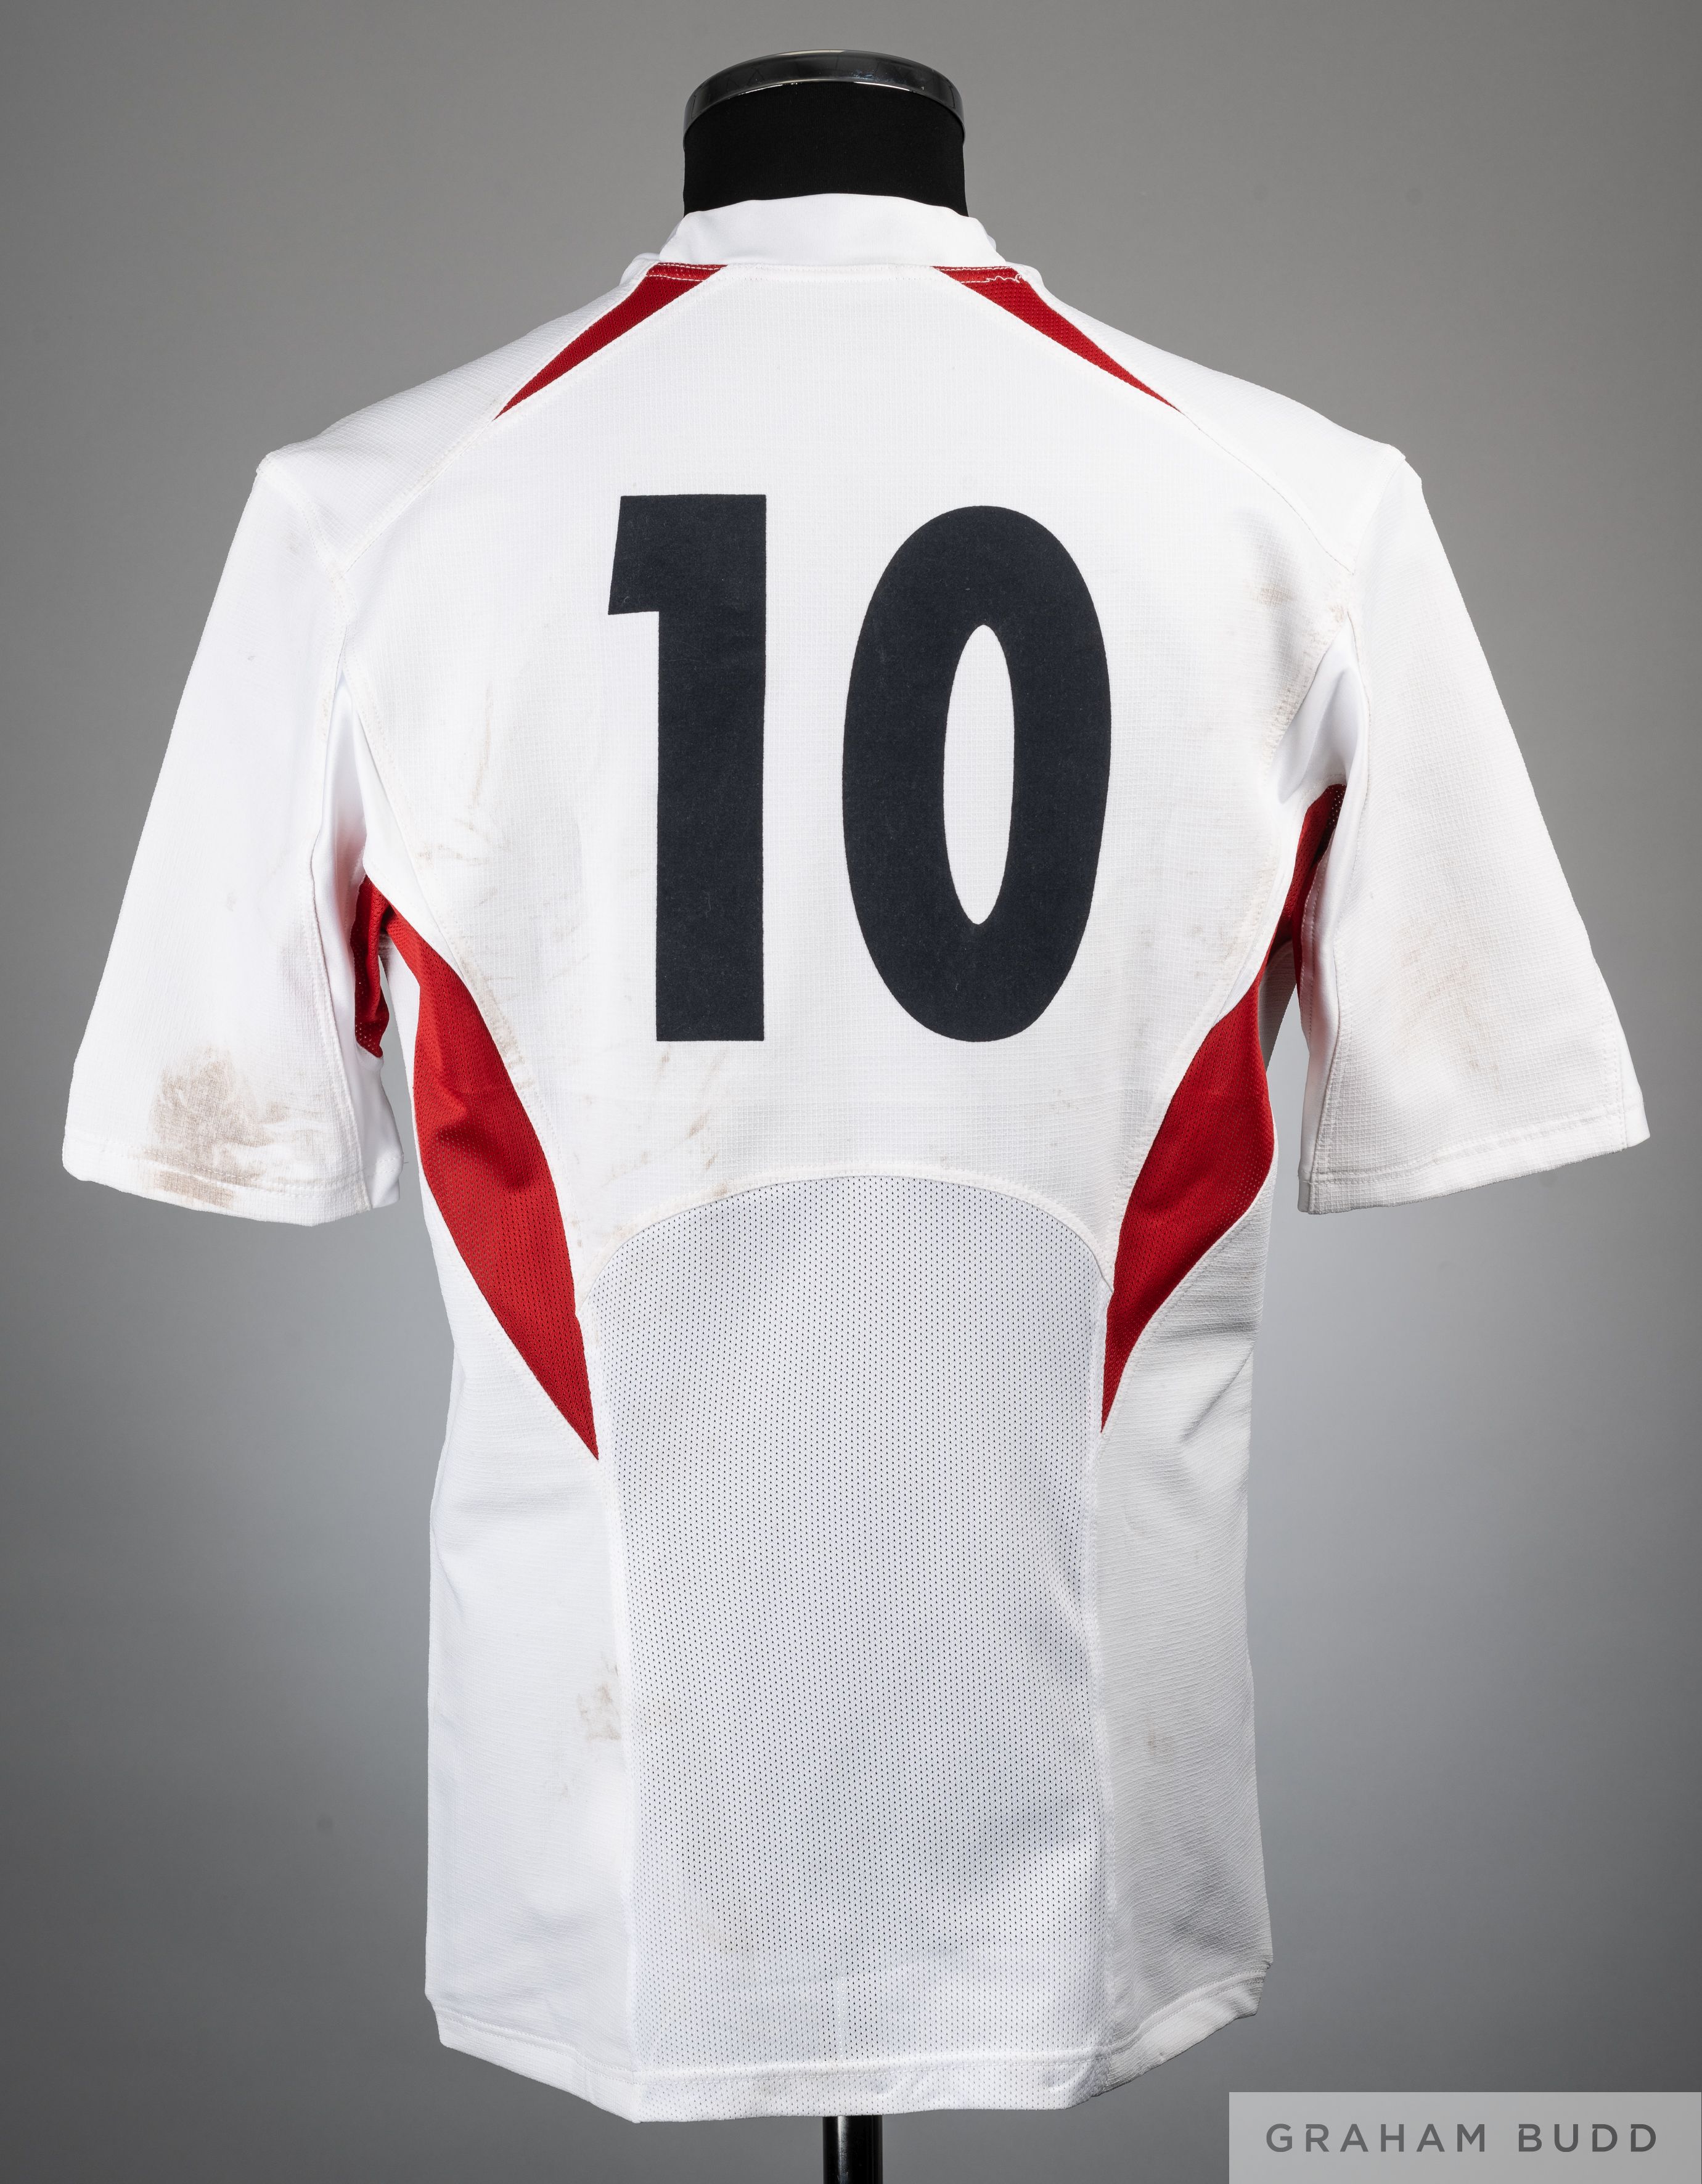 Jonny Wilkinson white and red No.10 England Rugby World Cup Final shirt - Image 2 of 3